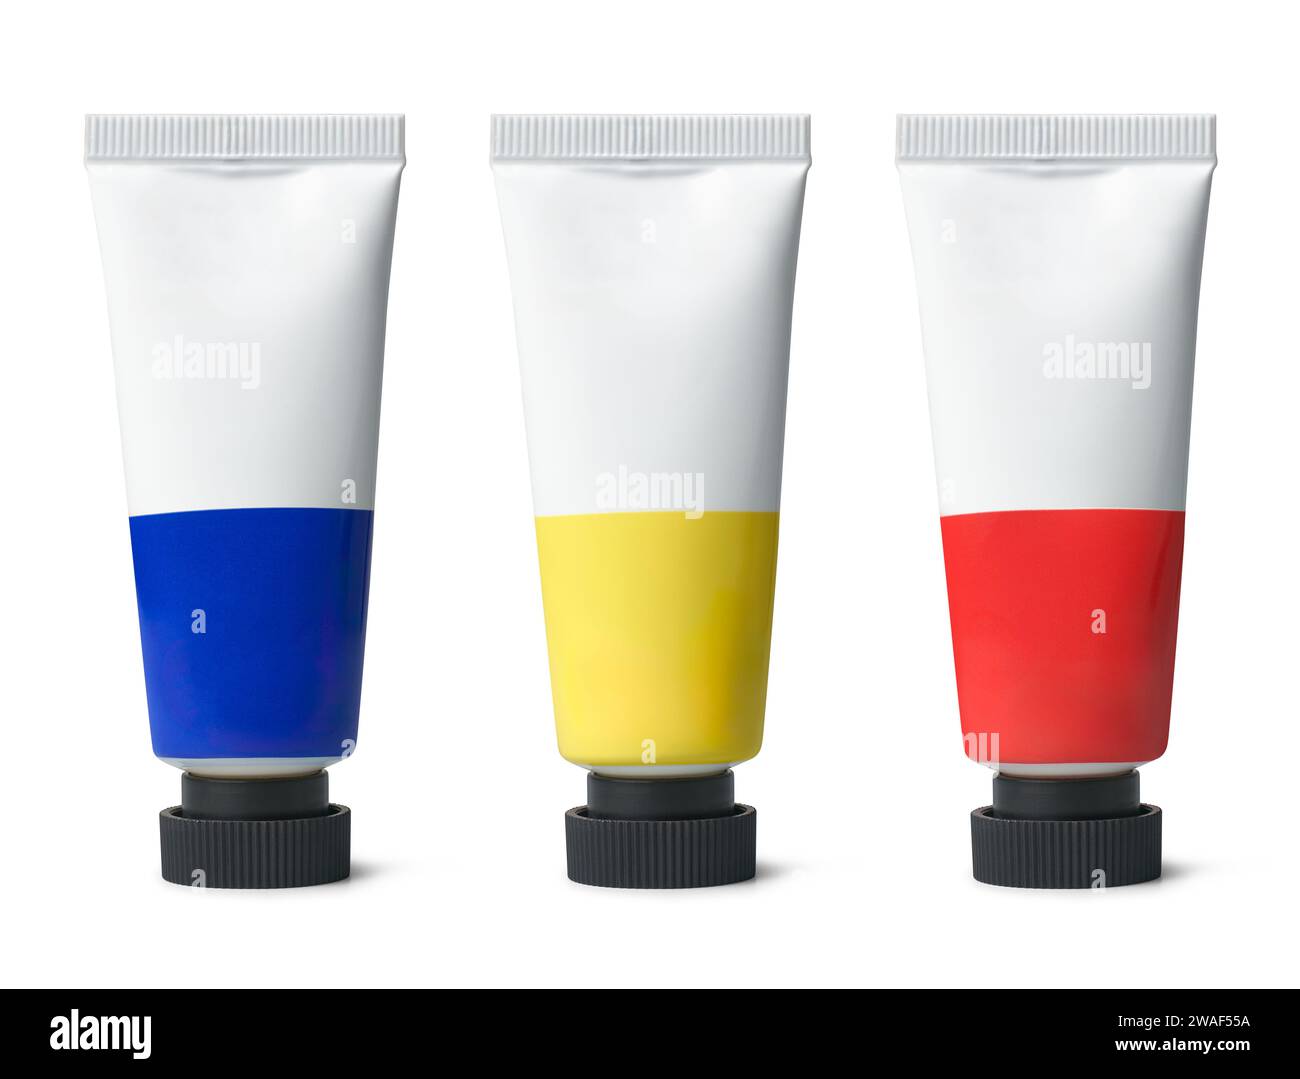 set of artist's paint tubes with black cap isolated on white background, art supplies of primary colors blue, yellow and red, mock-up template of oil Stock Photo